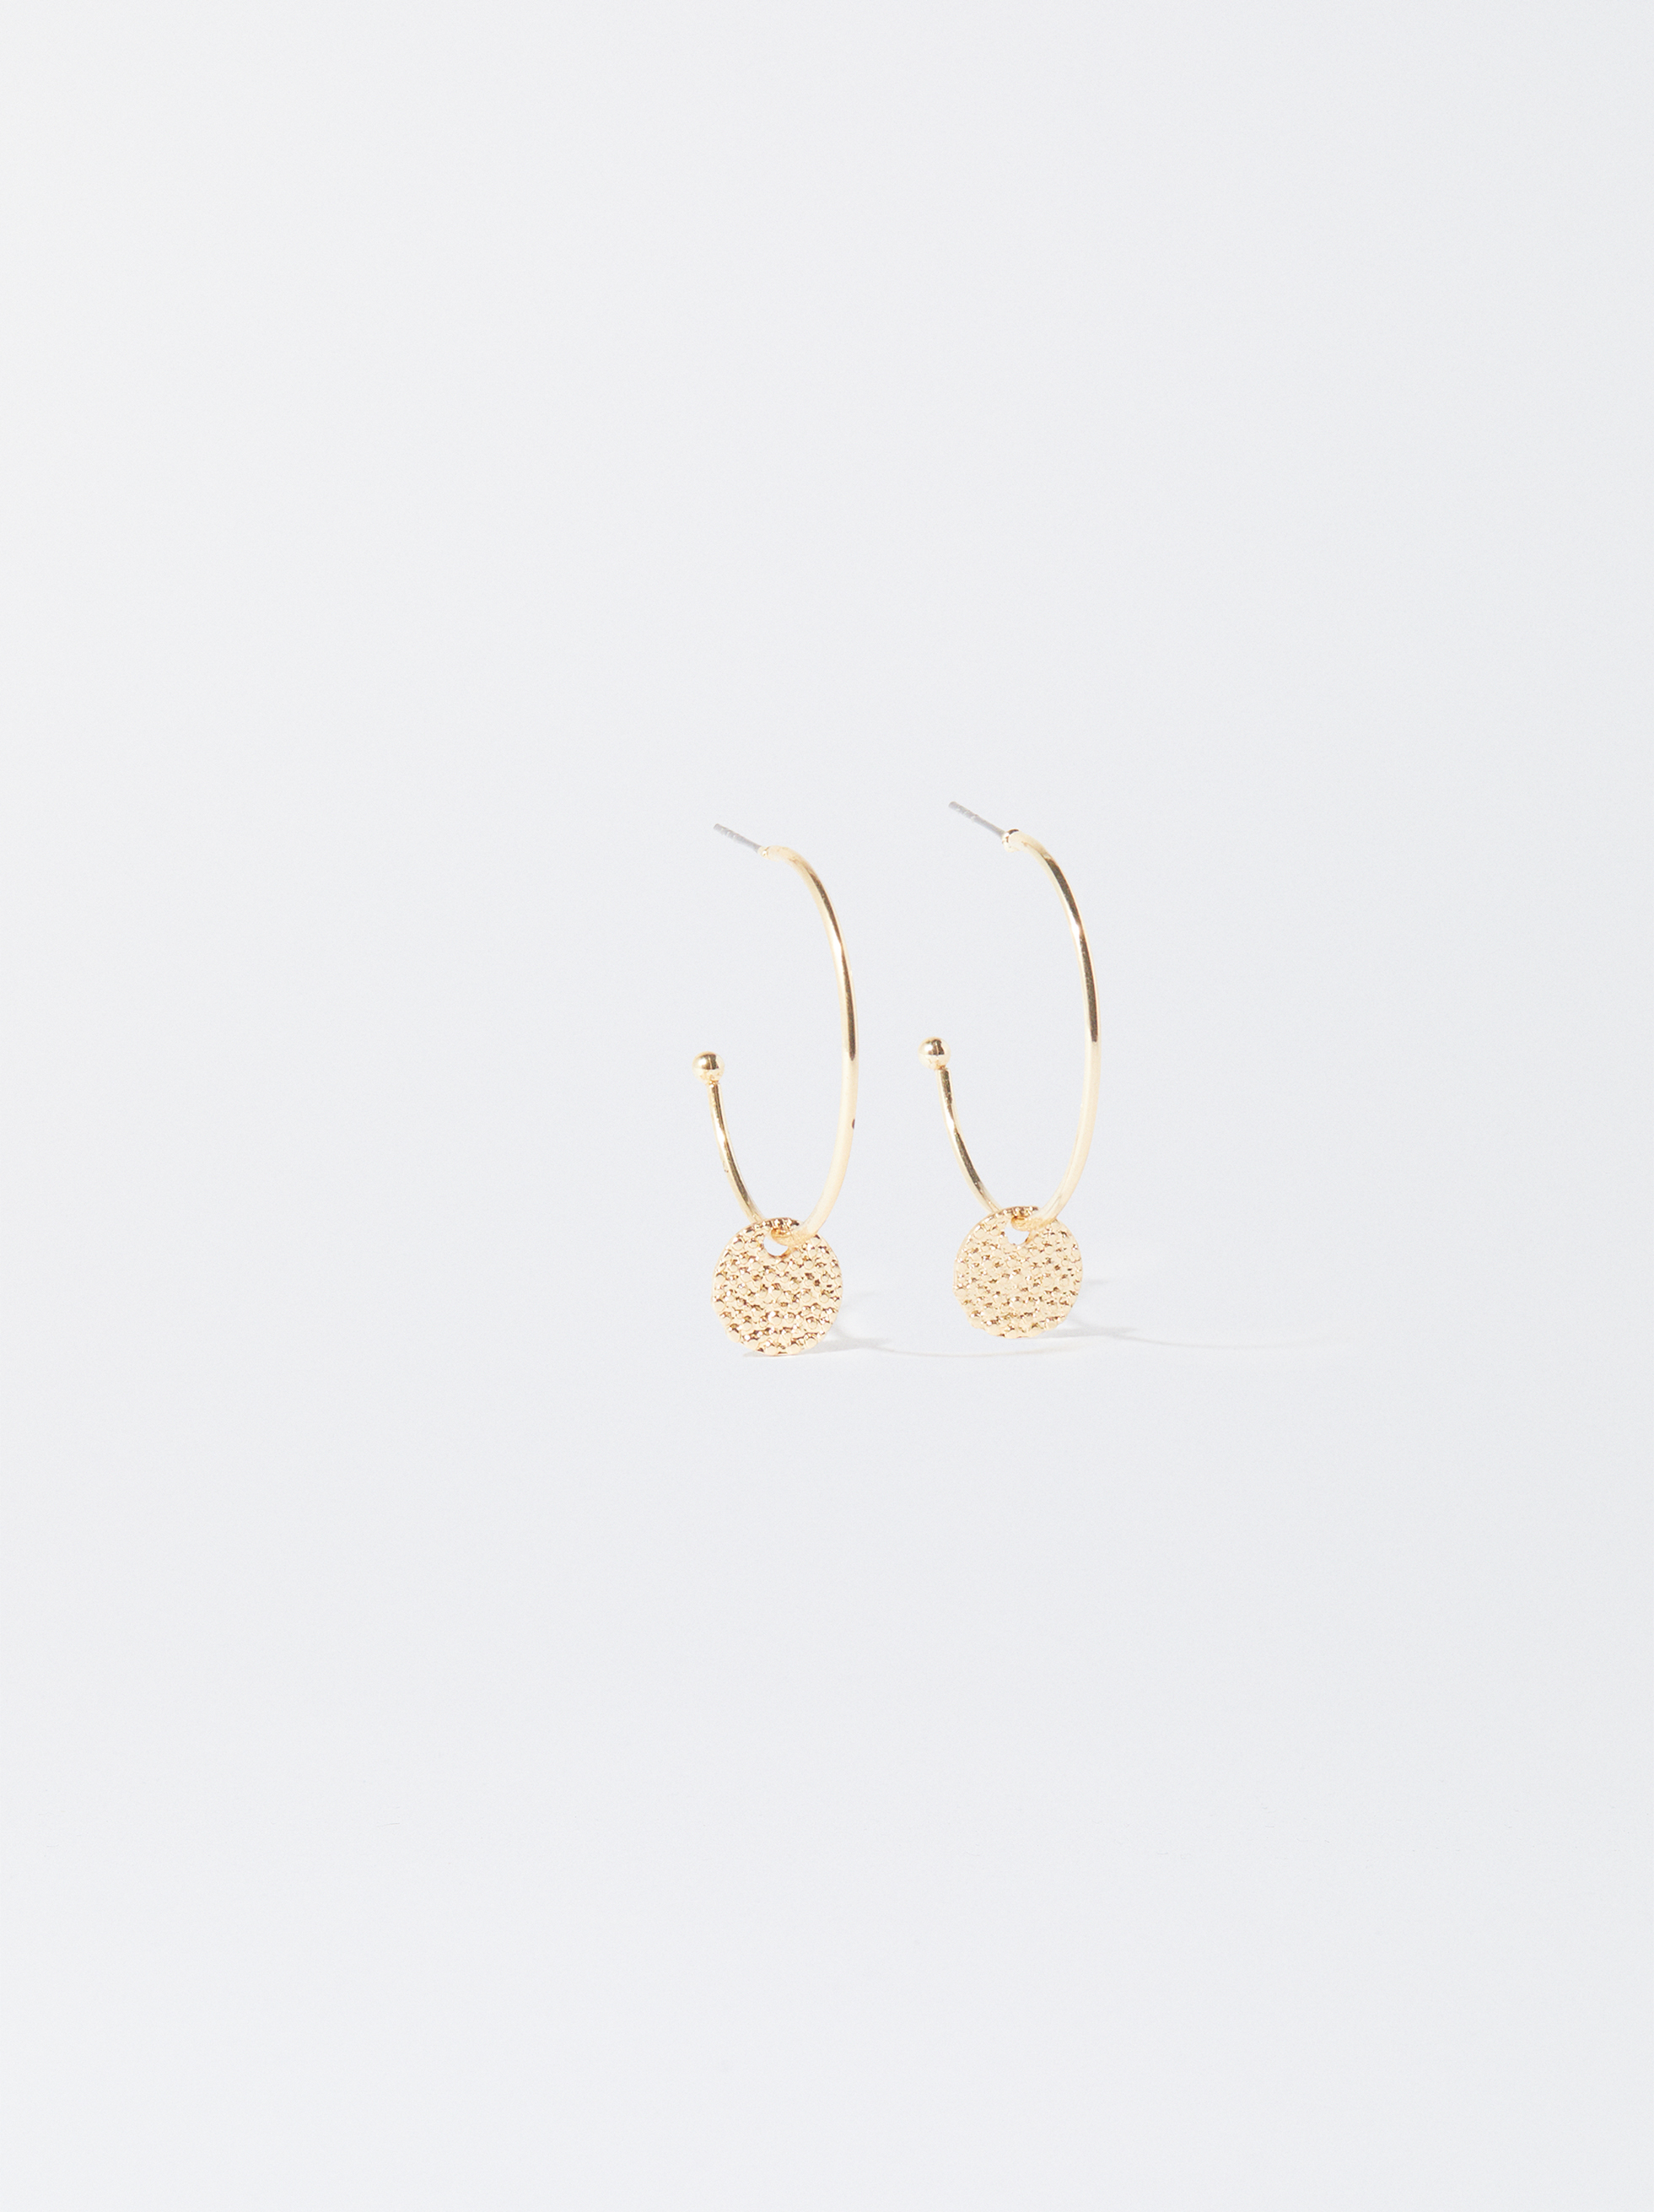 Gold-Toned Hoop Earrings With Medallions image number 1.0